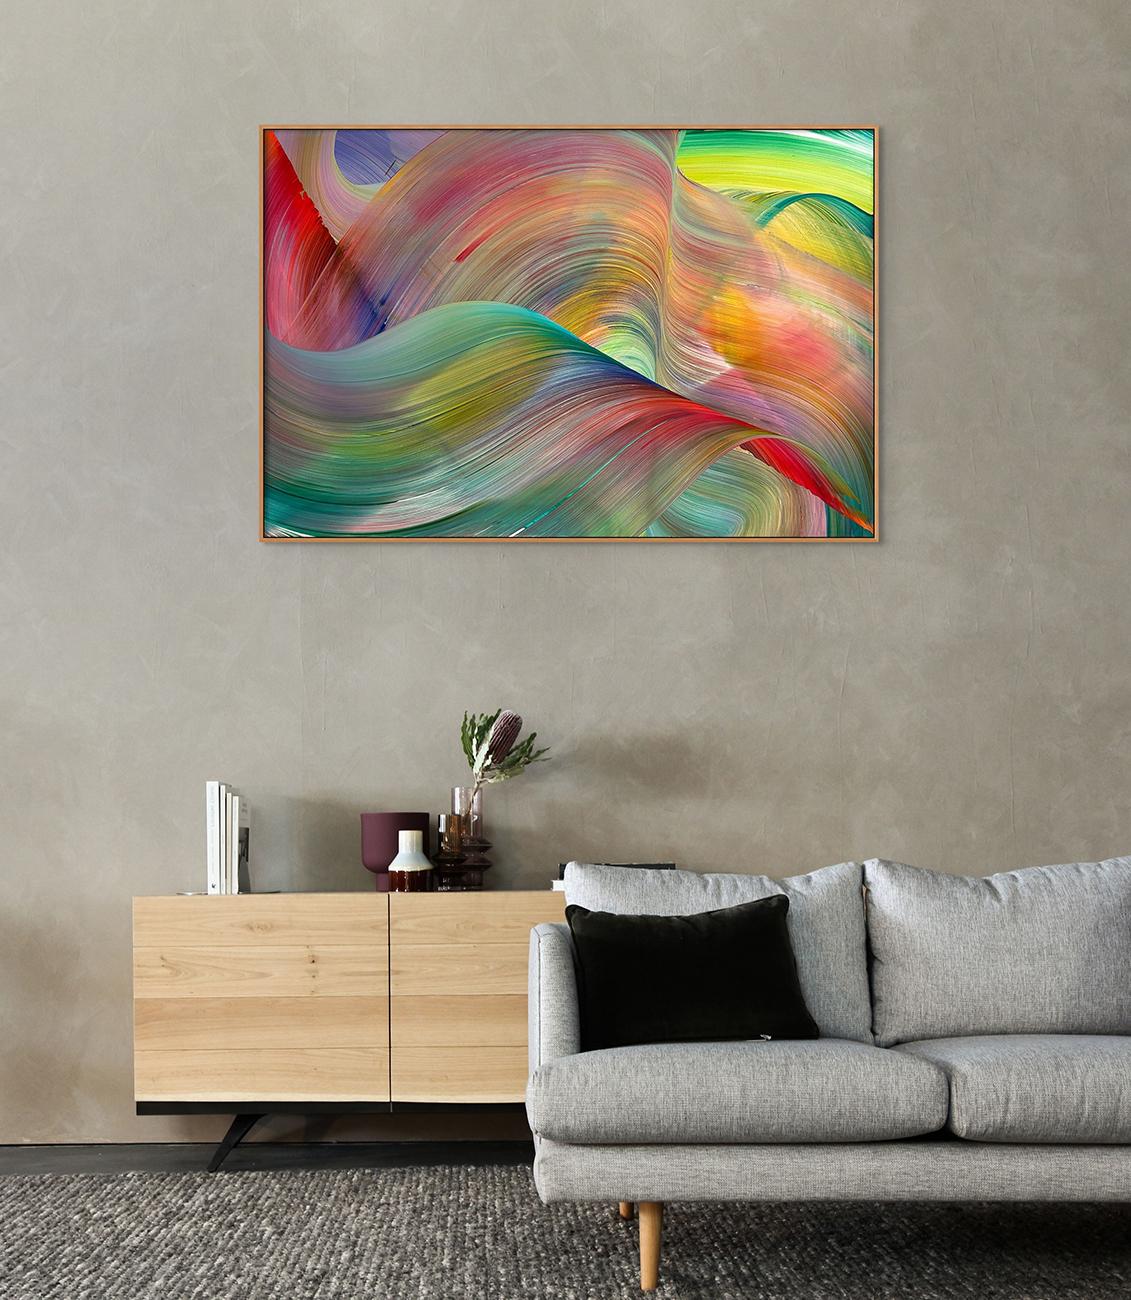 There Will Come A Day (Abstract painting) - Painting by Nikolaos Schizas